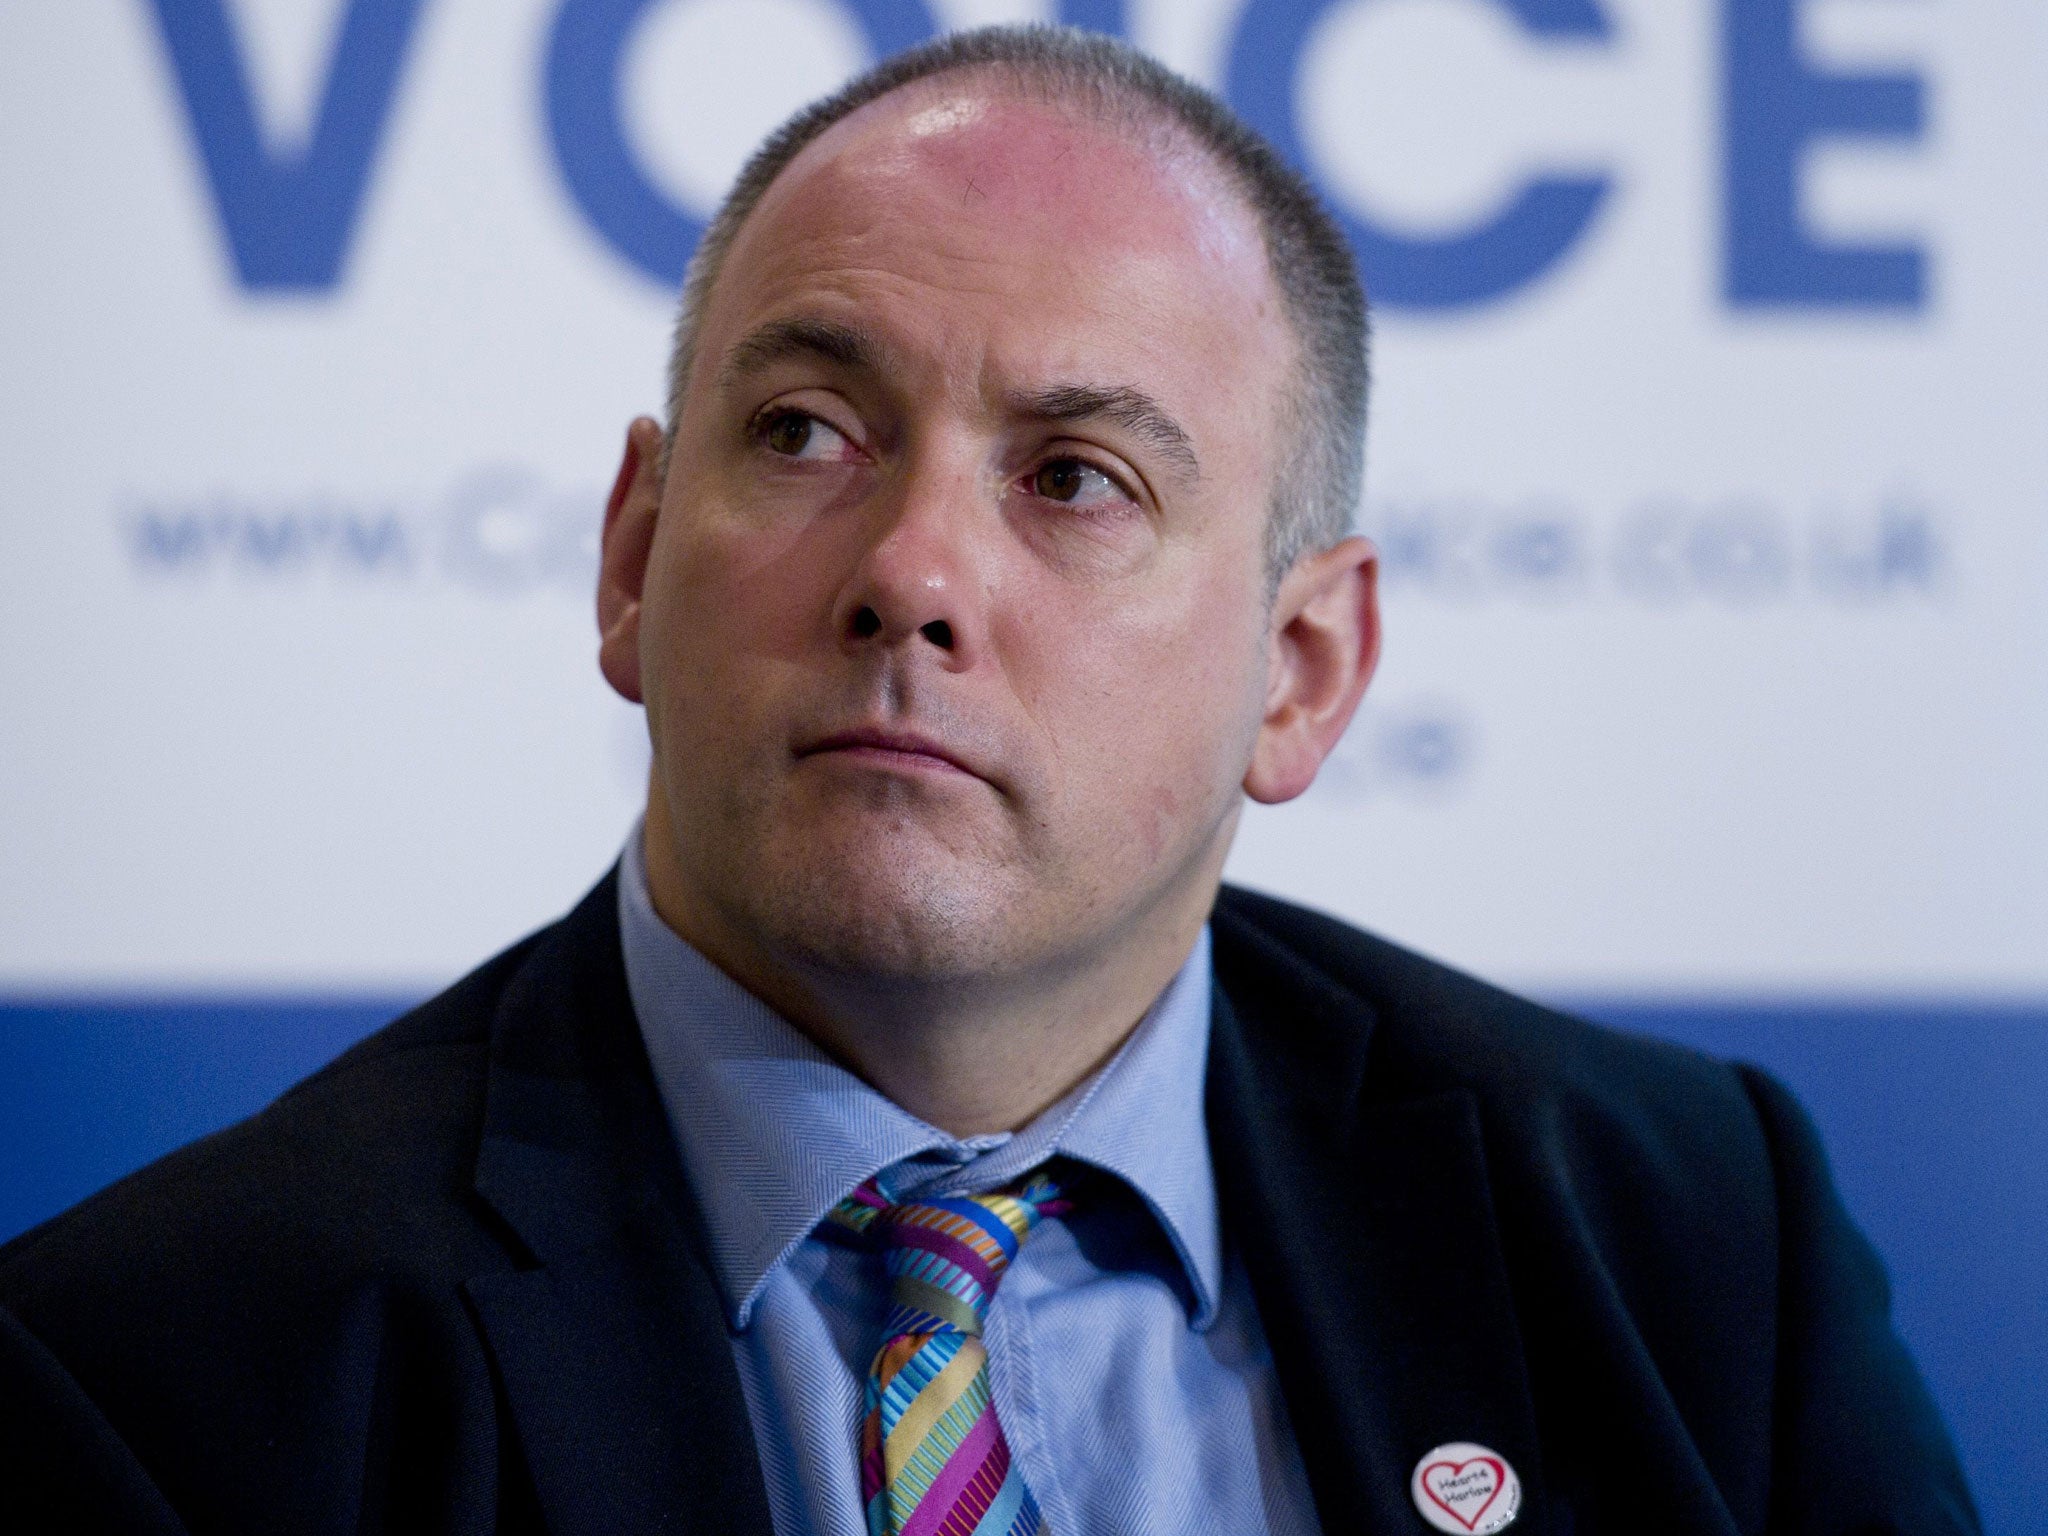 Parents are being forced to deal with a 'Wild West' exclusion system, Robert Halfon said